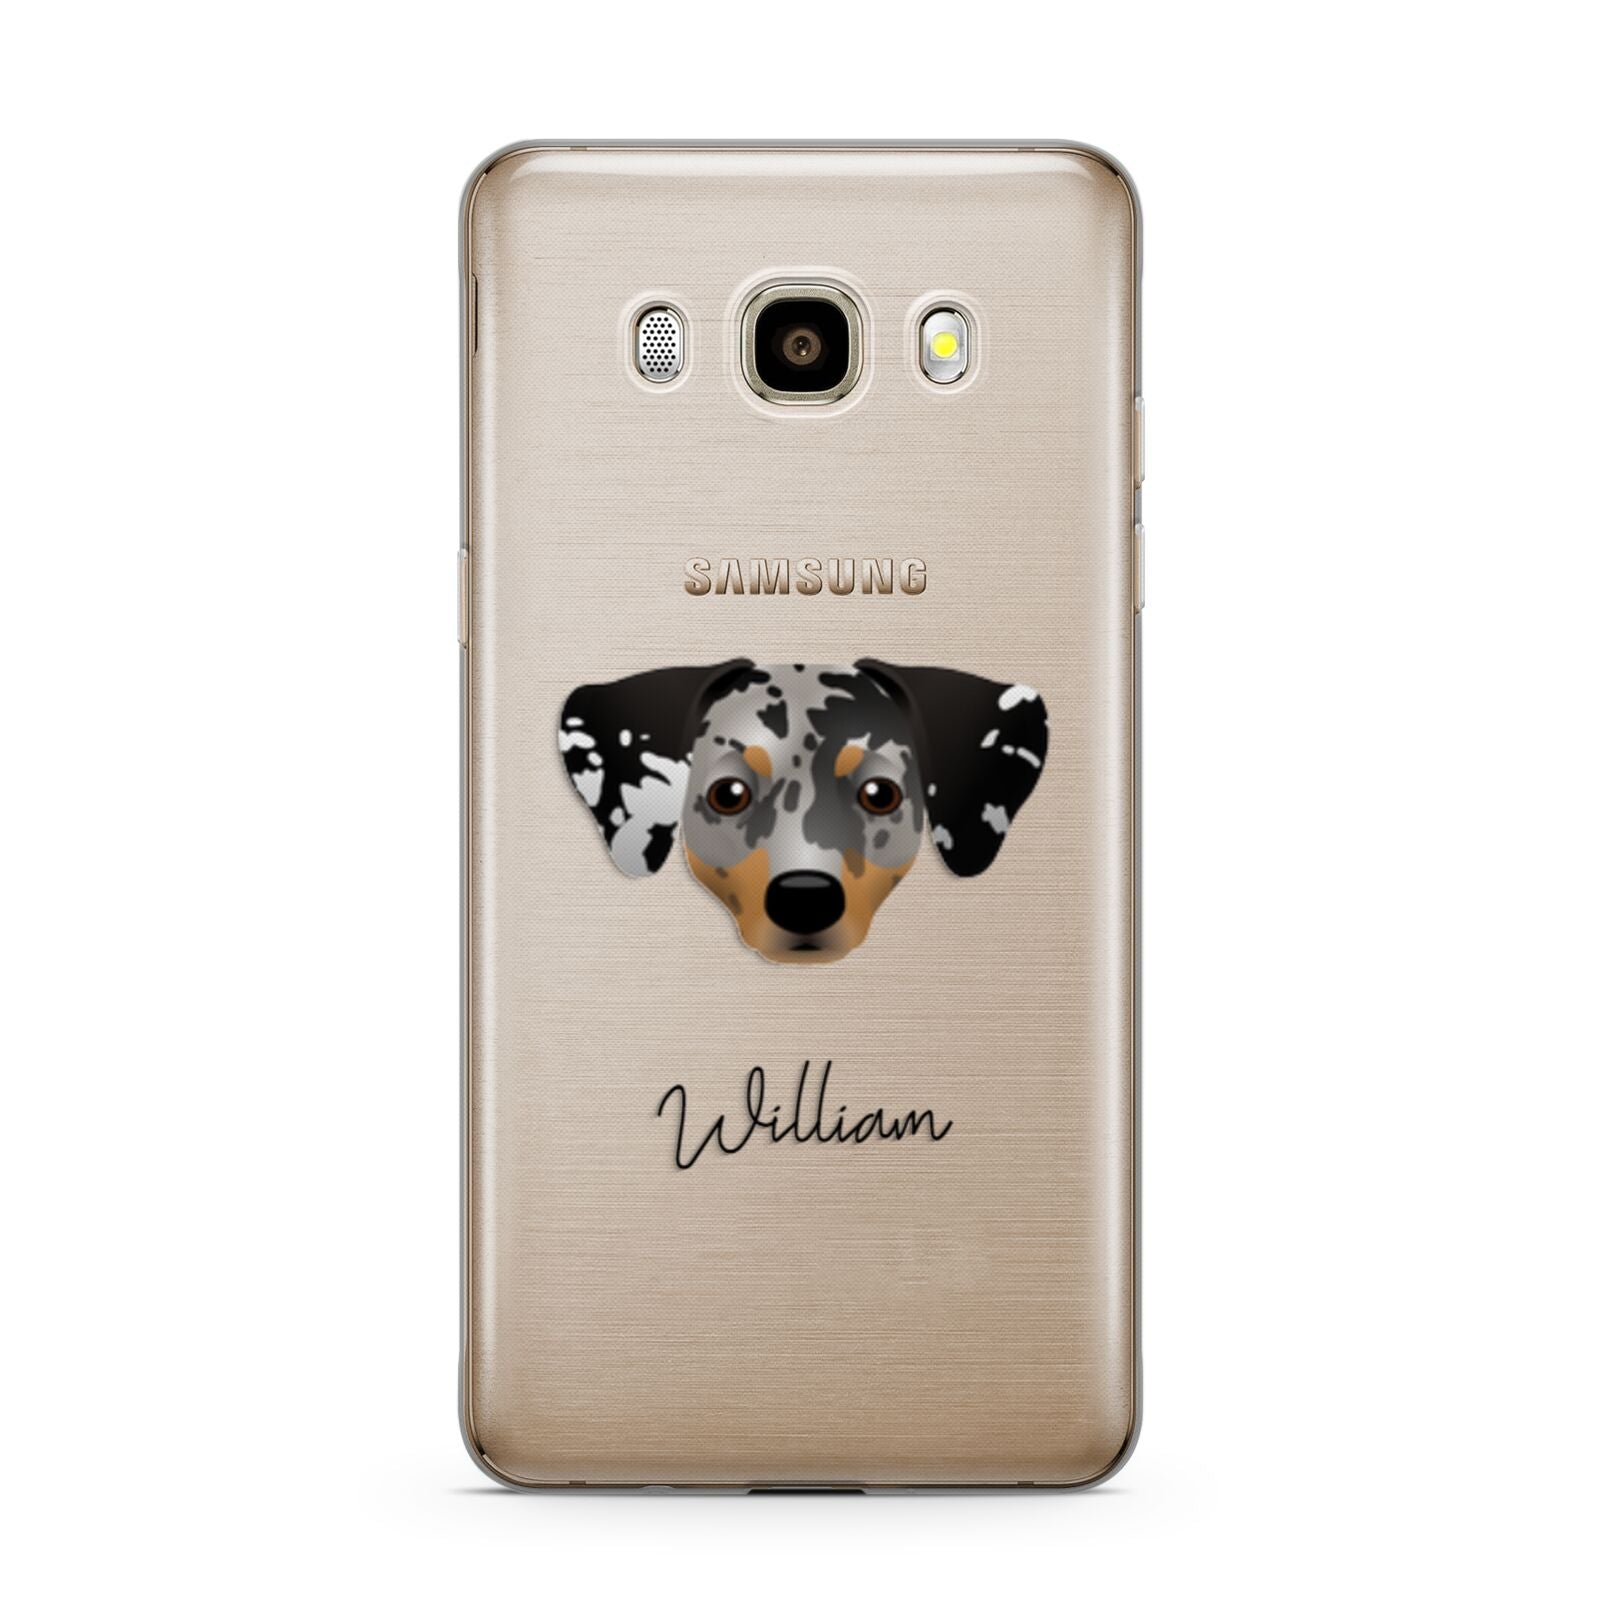 Chiweenie Personalised Samsung Galaxy J7 2016 Case on gold phone